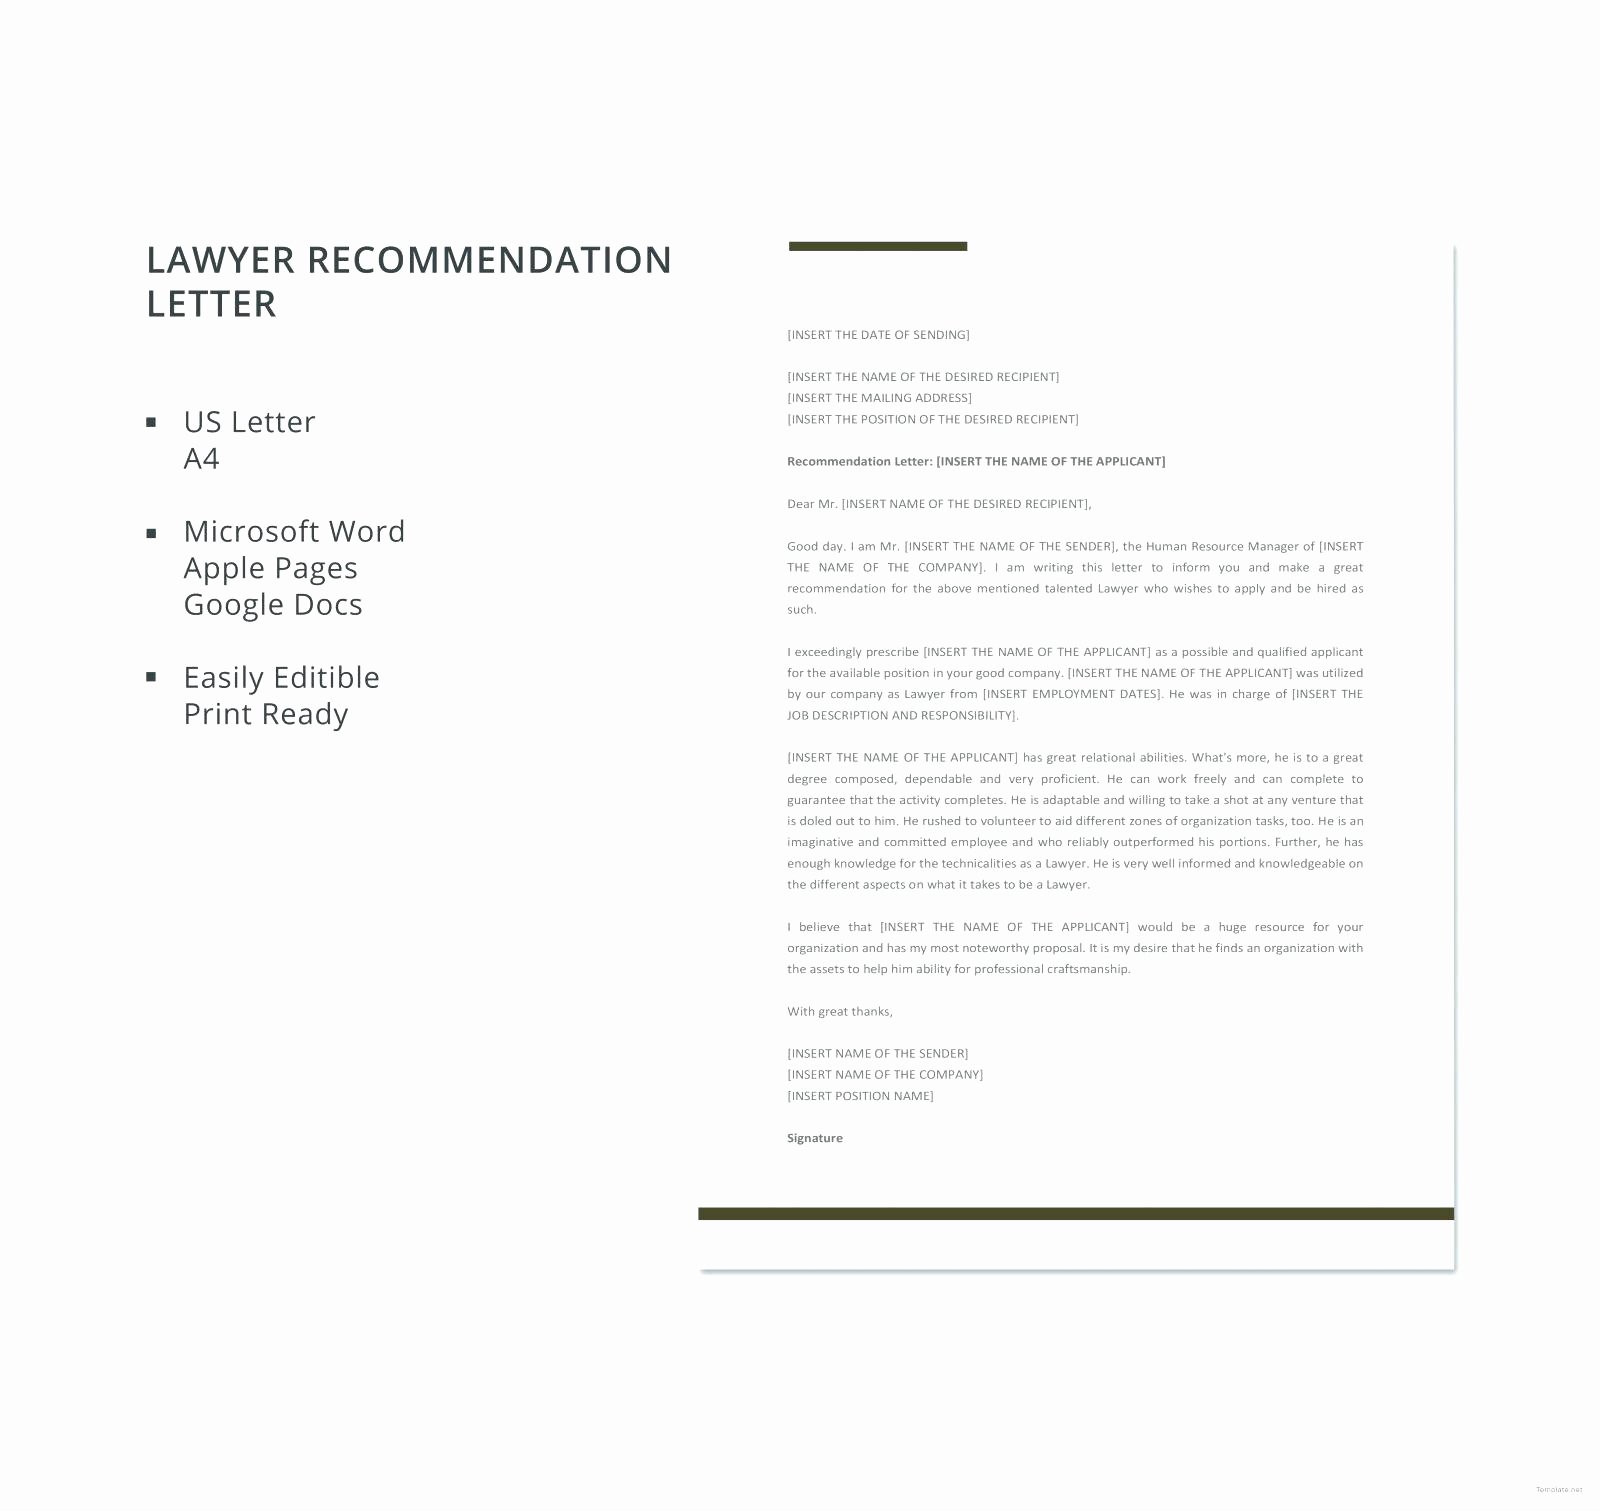 Law School Recommendation Letter Example New Law School Re Mendation Letter From Employer Samples